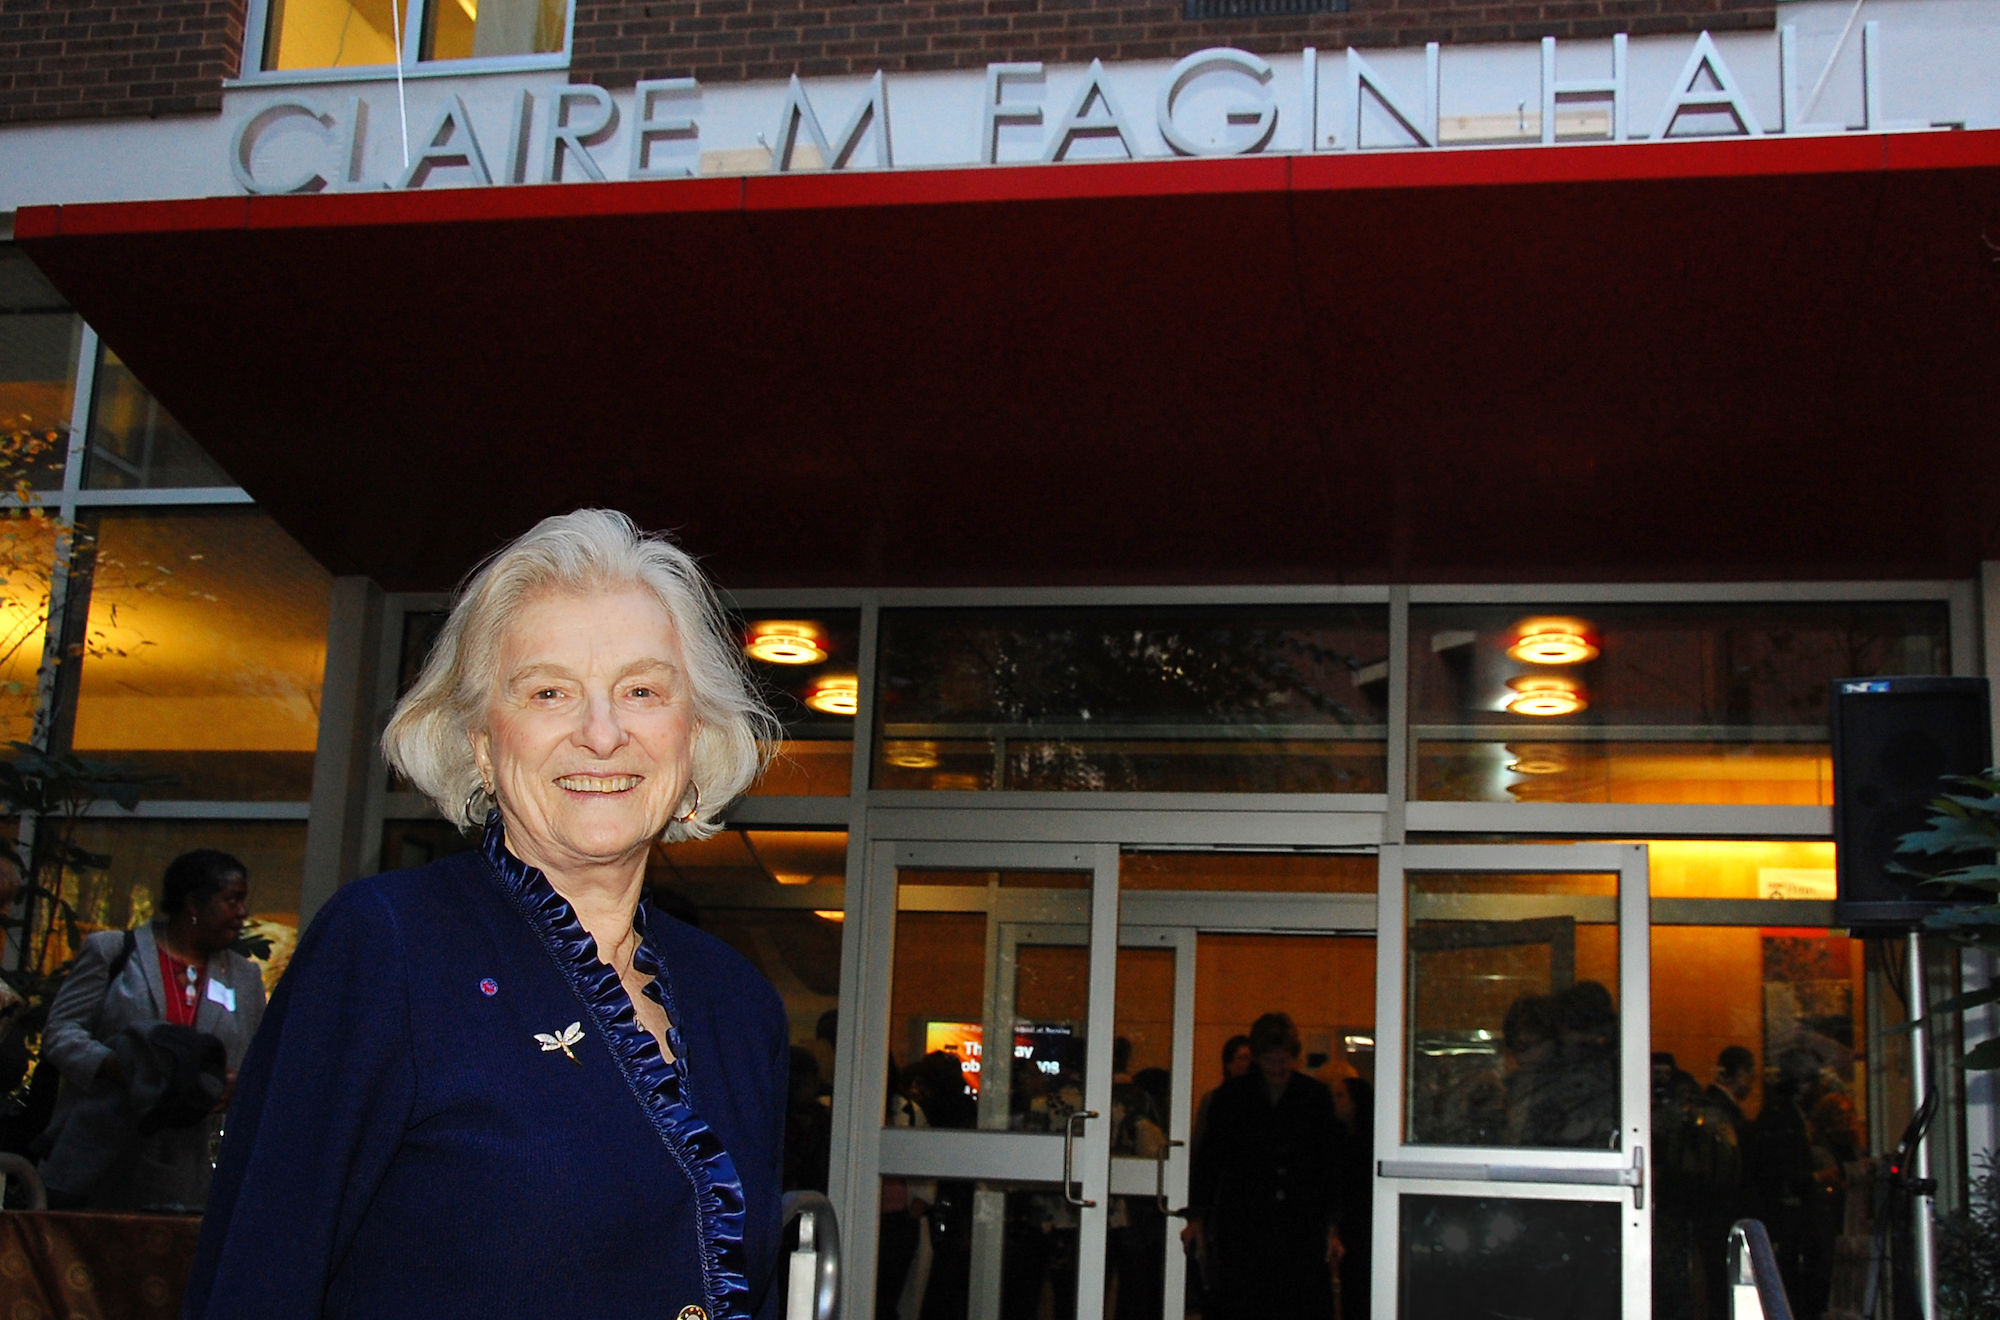 Claire Fagin stands in front of Claire M. Fagin Hall on Penn campus.